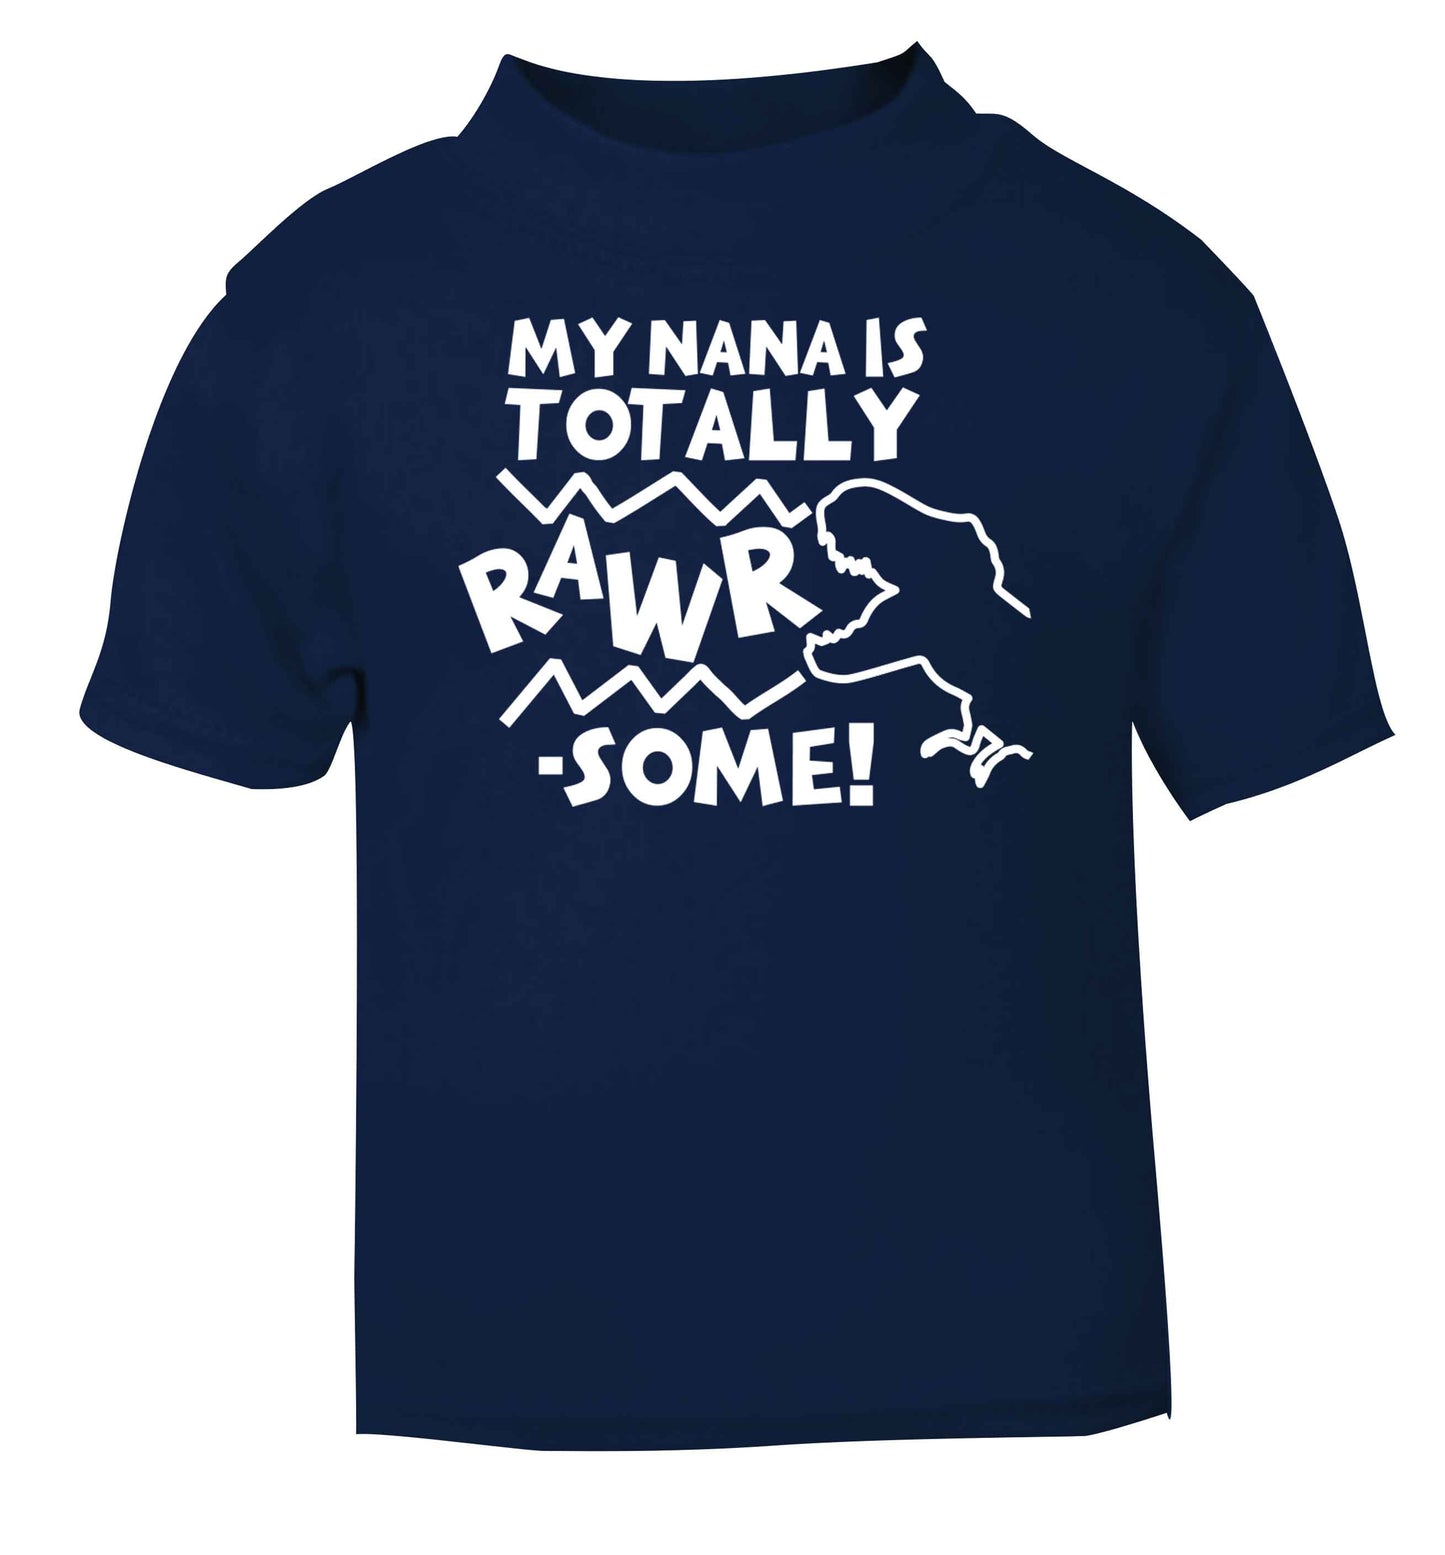 My nana is totally rawrsome navy baby toddler Tshirt 2 Years